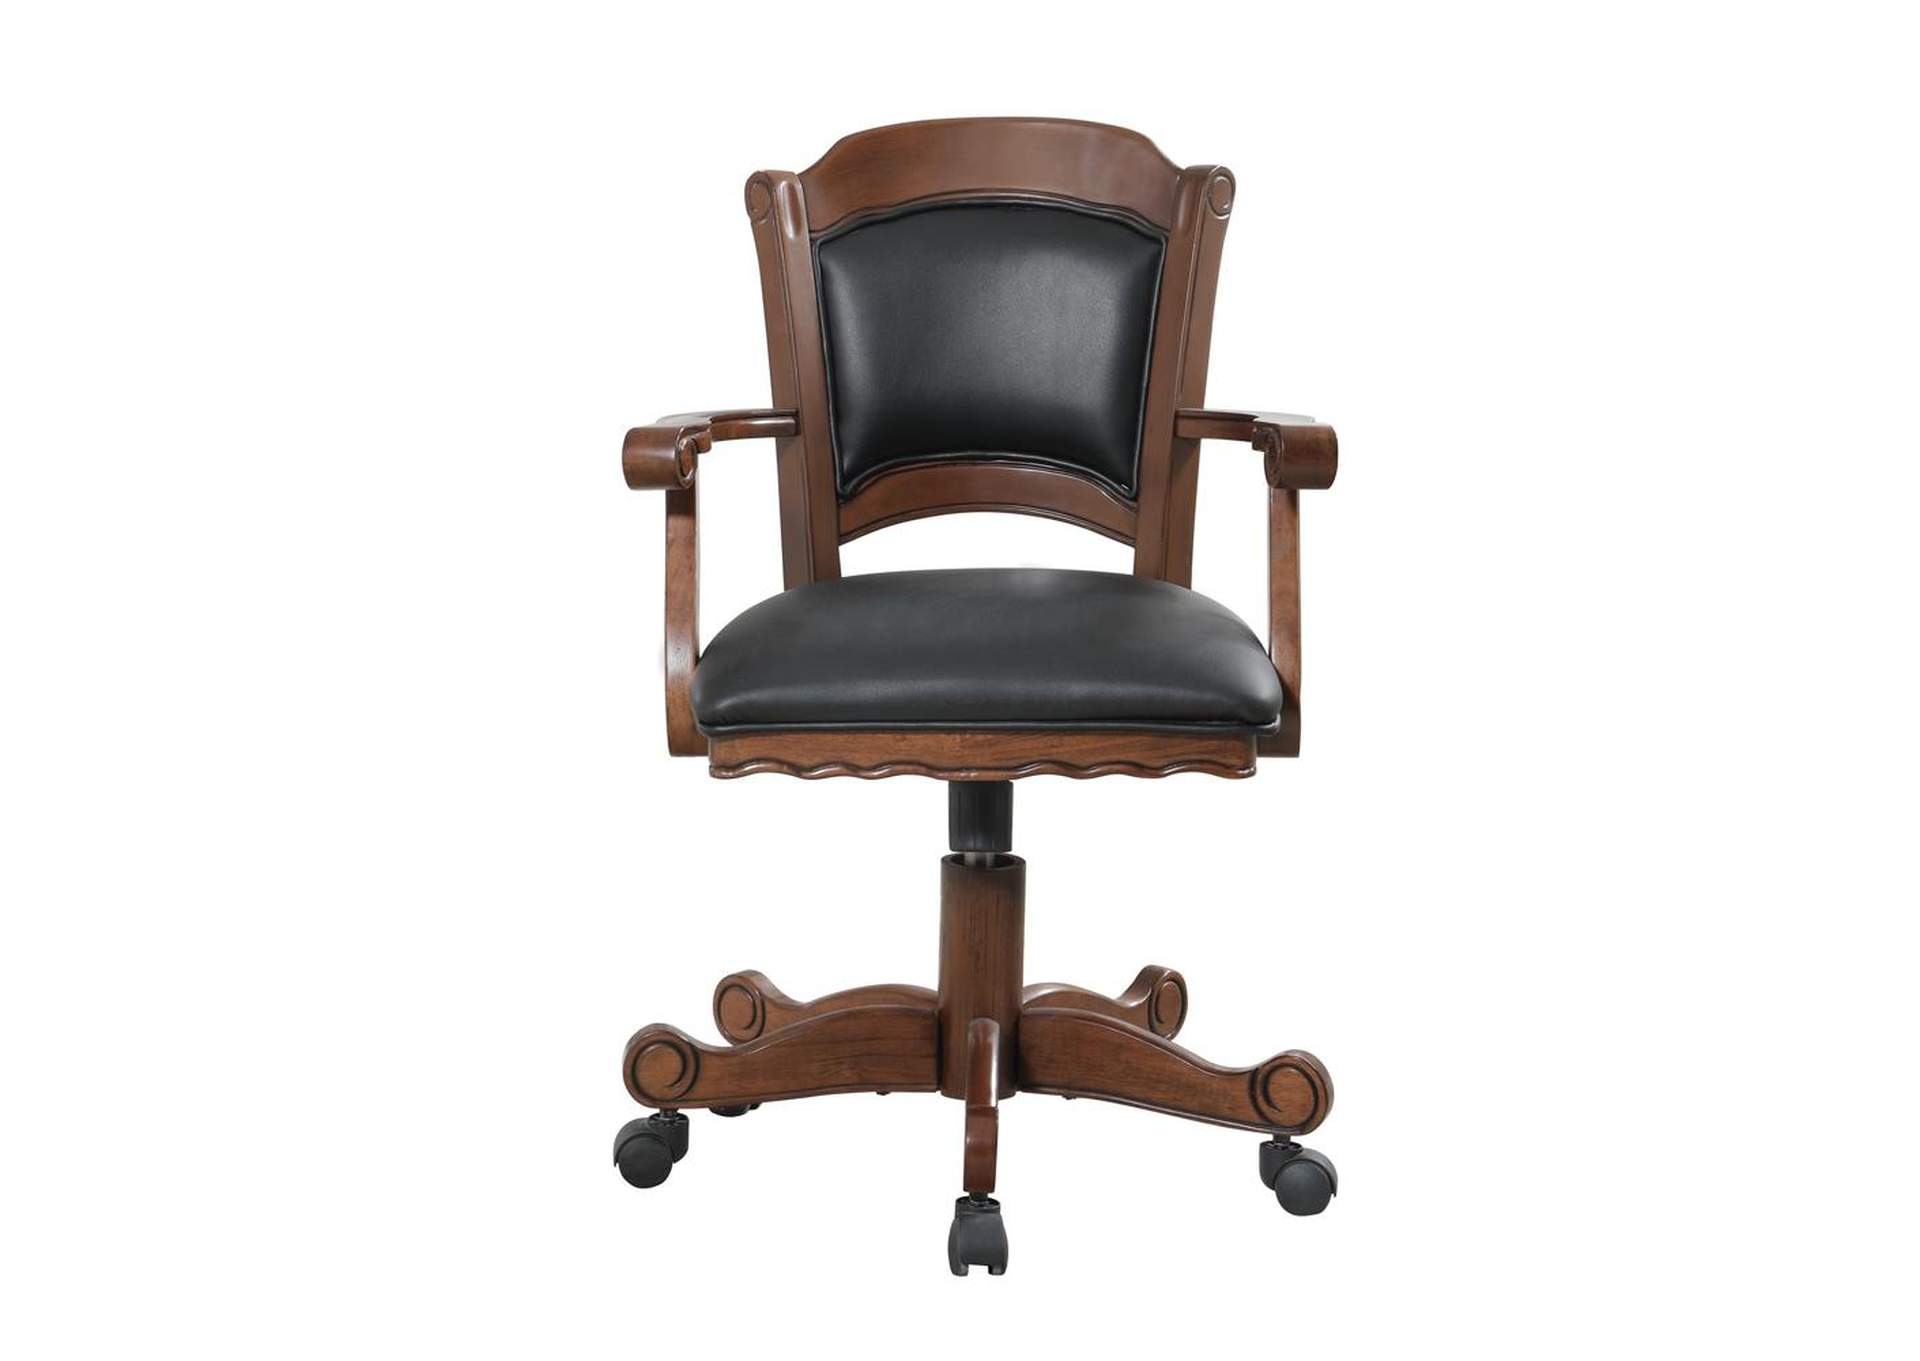 Turk Game Chair with Casters Black and Tobacco,Coaster Furniture